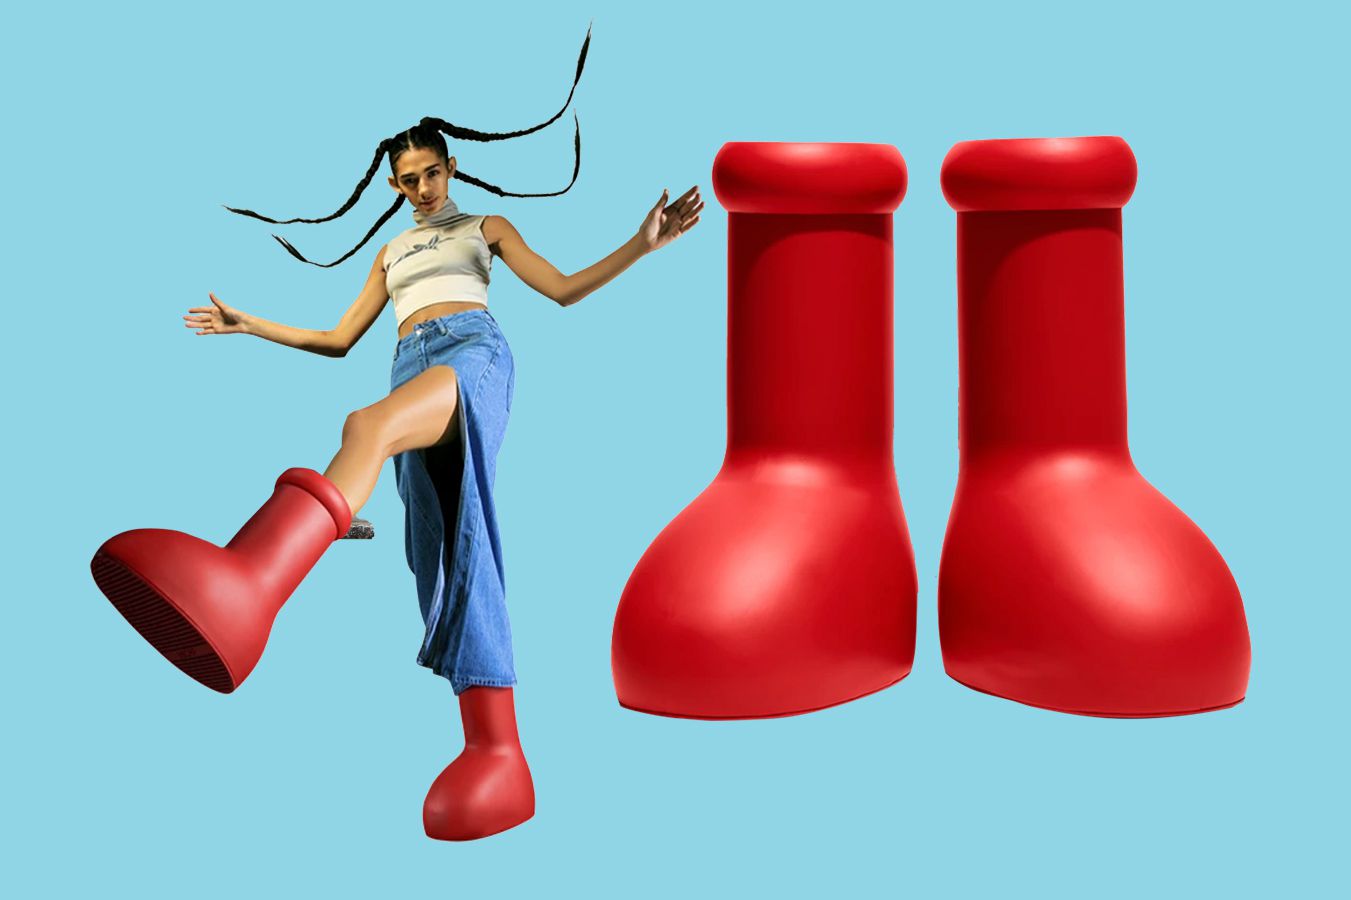 Why Is Everyone Wearing These Cartoonish Red Boots?